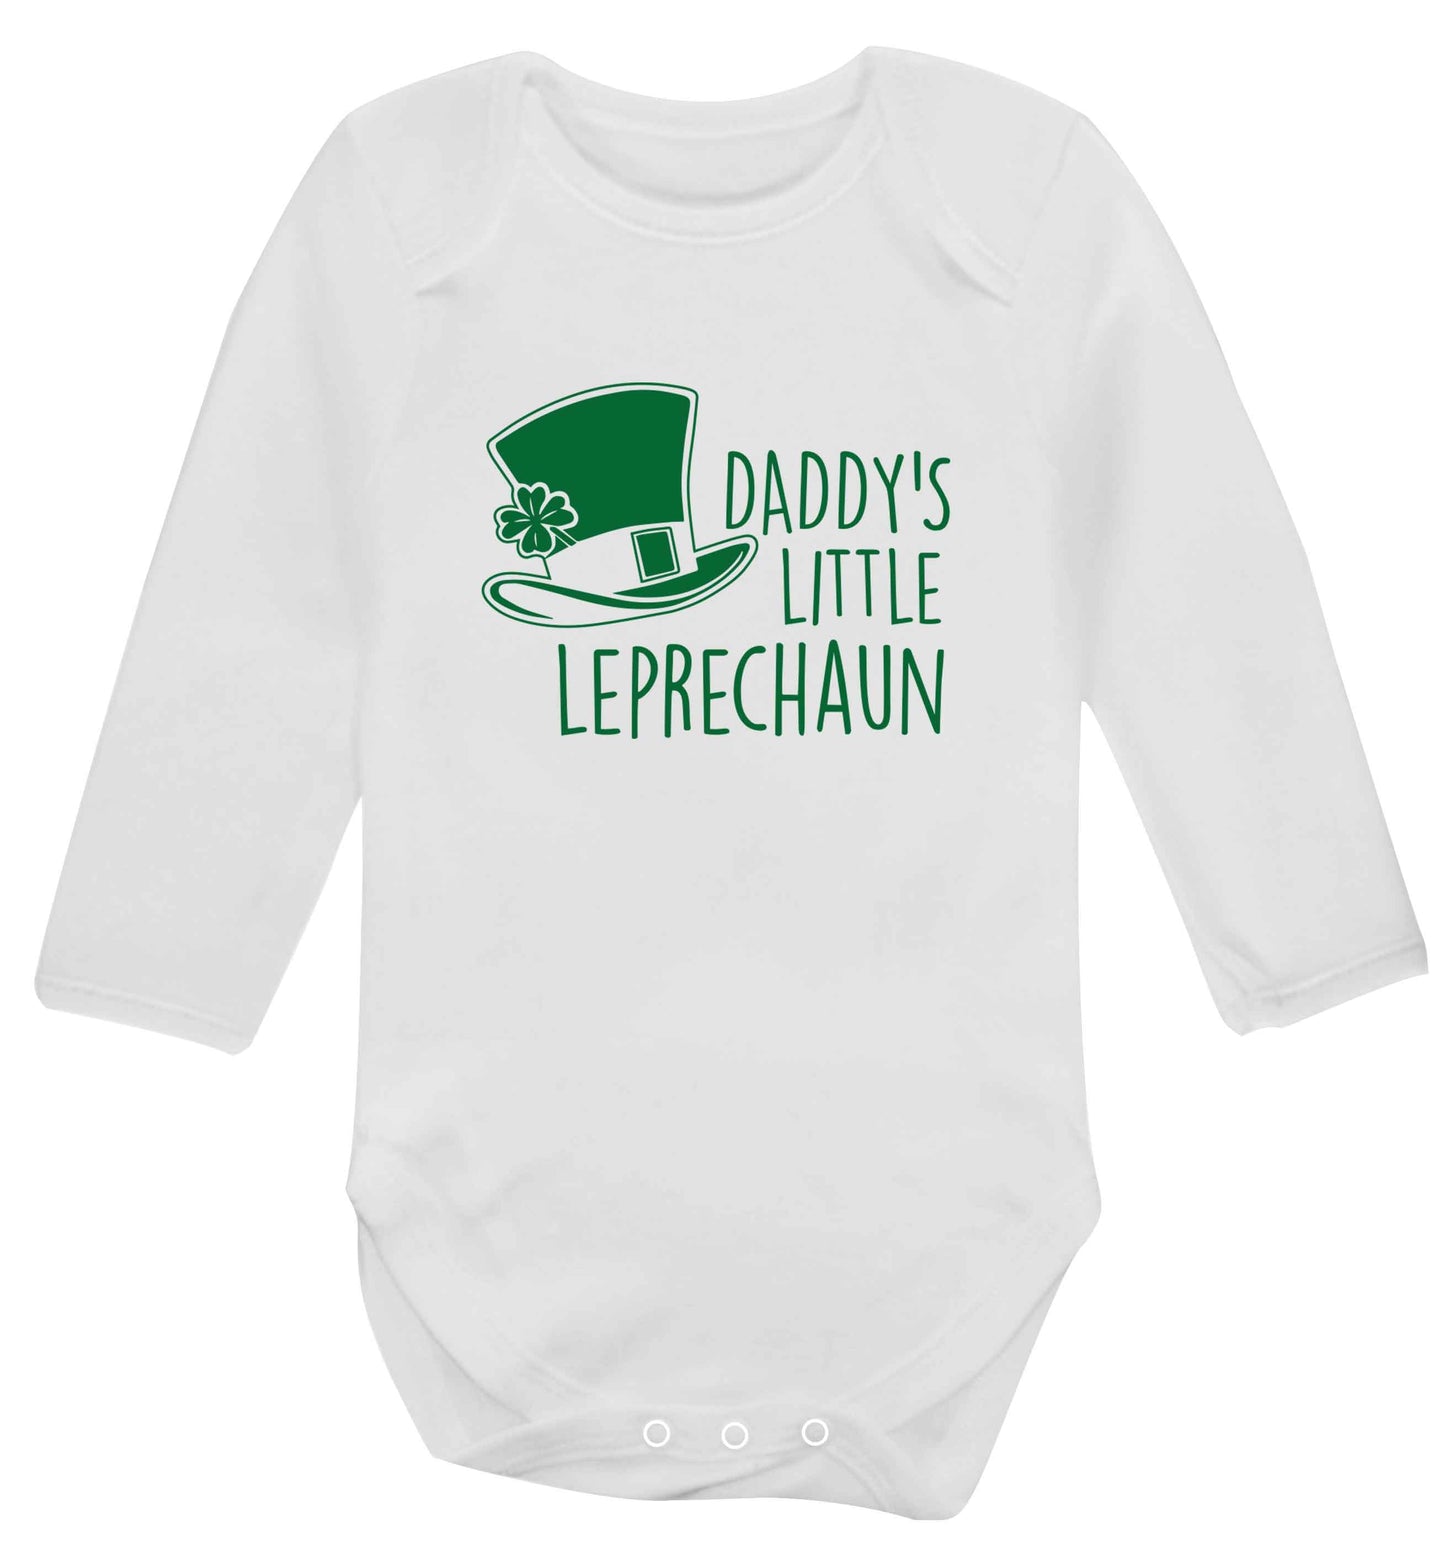 Daddy's lucky charm baby vest long sleeved white 6-12 months